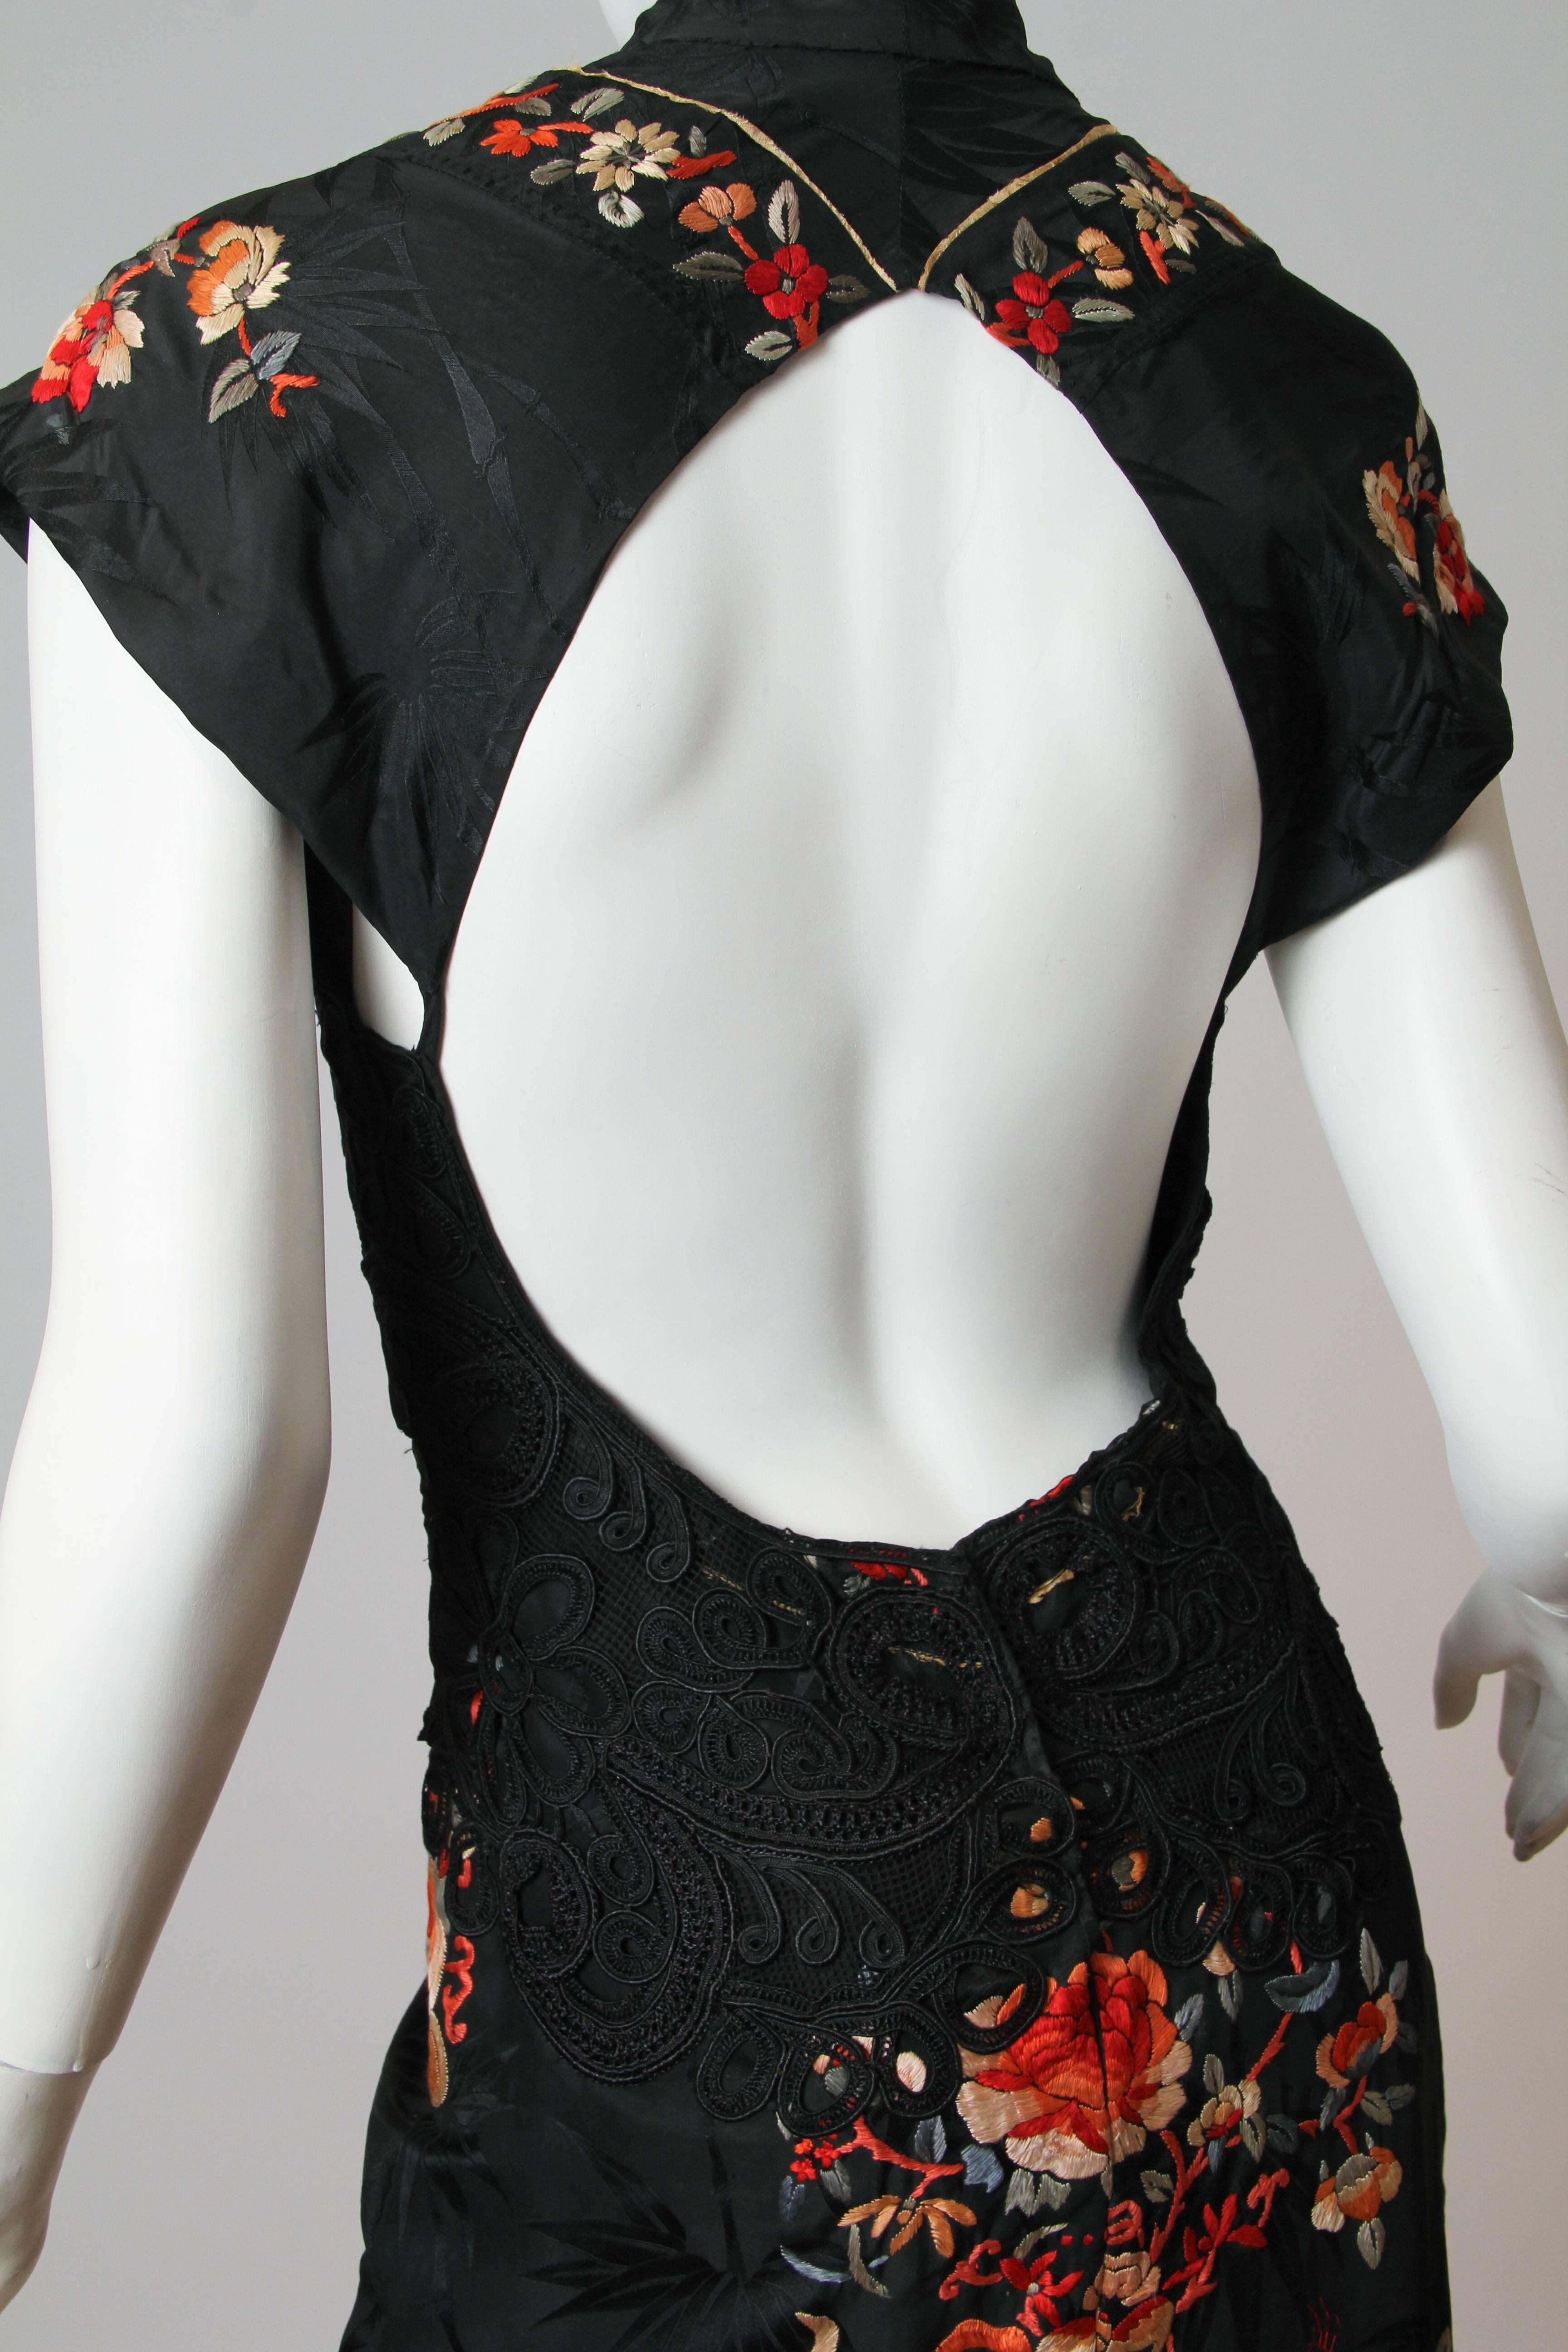 Backless Hand Embroidered Chinese Dress with Victorian Lace 2